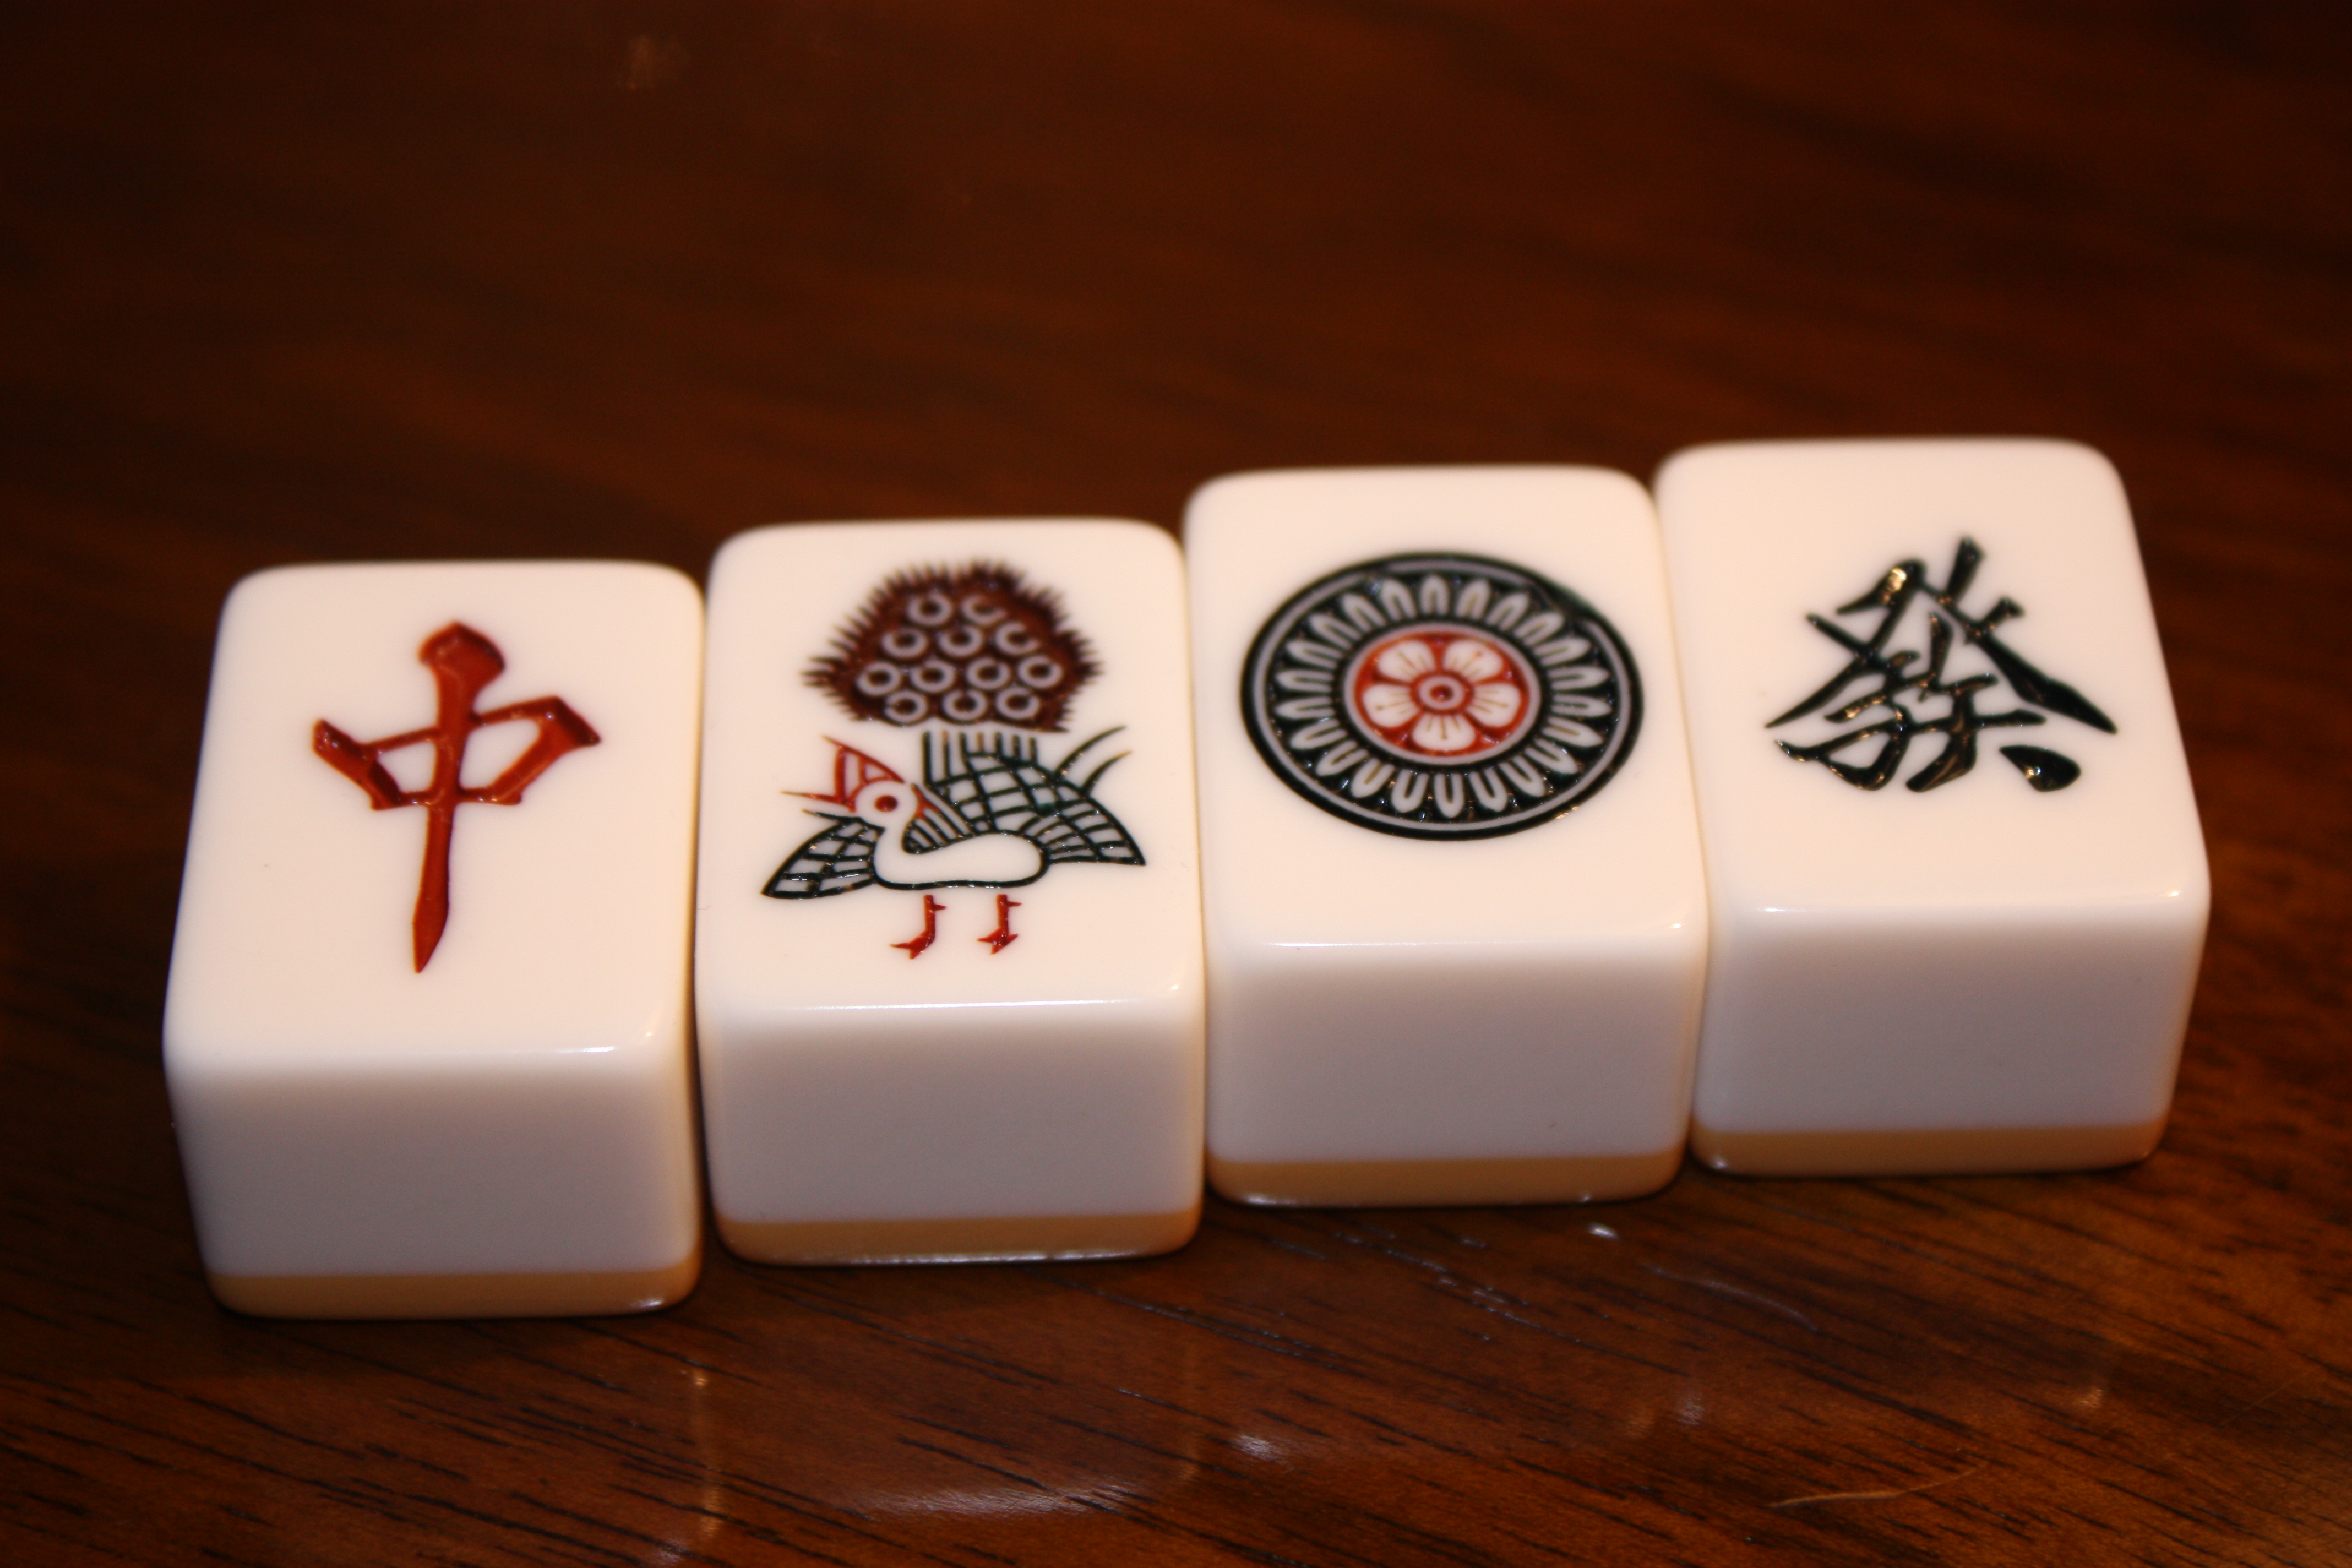 Download Mahjong wallpapers for mobile phone, free Mahjong HD pictures